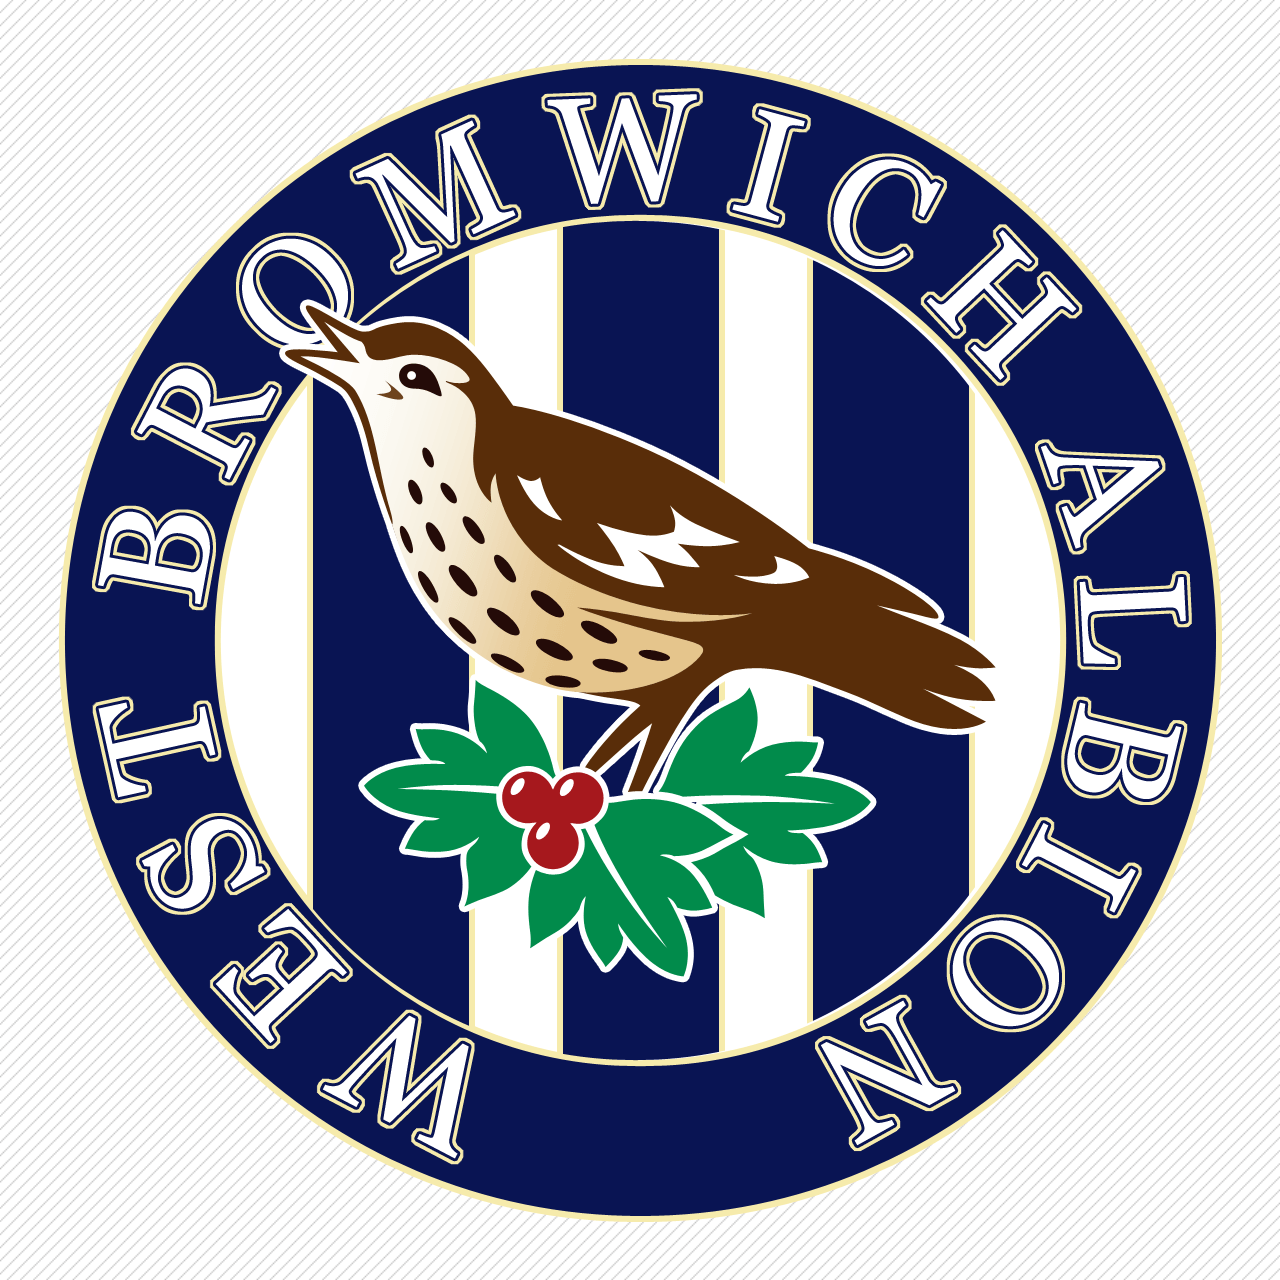 West Brom Logo - West Bromwich Albion (old logo). SBC -West Bromwich Albion FC